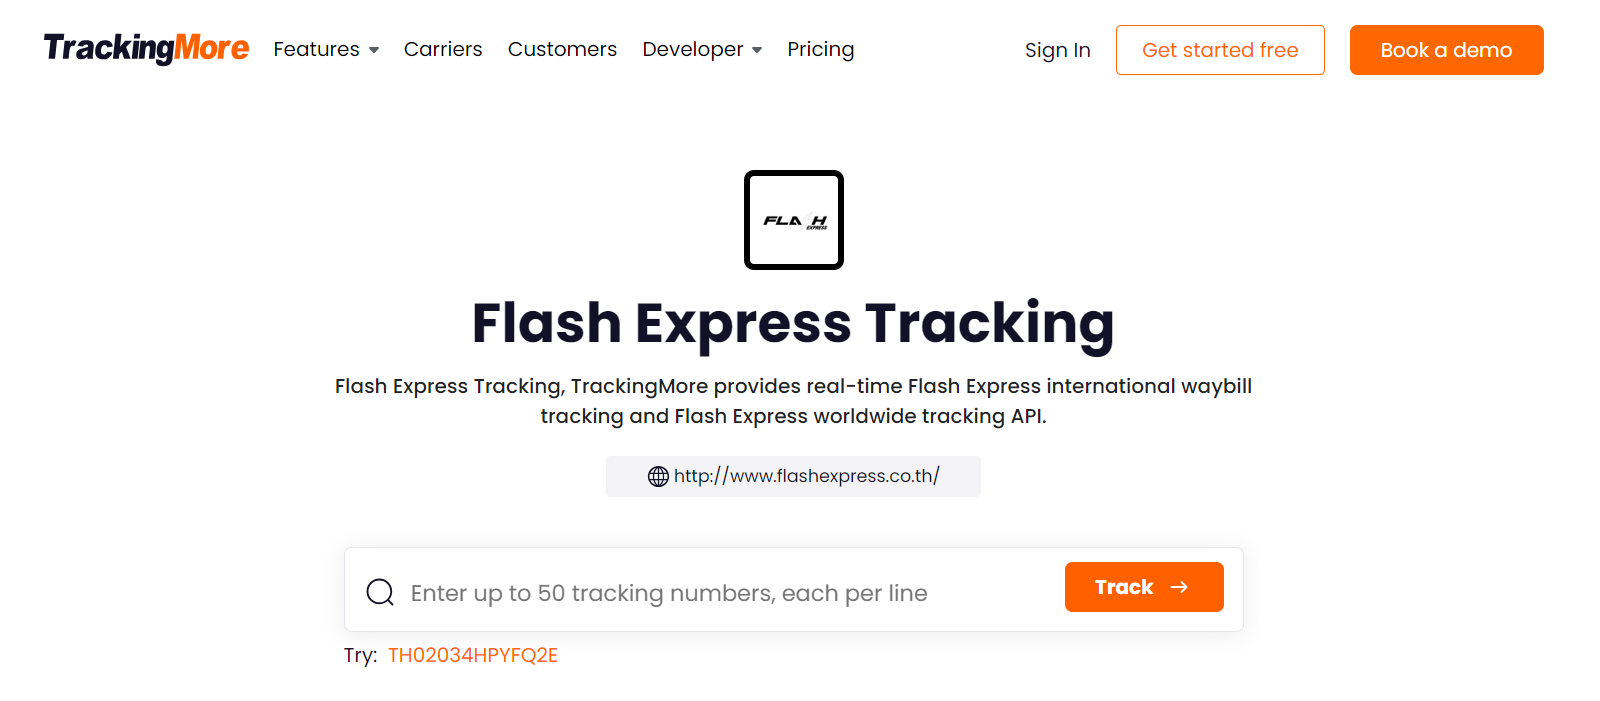 TrackingMore Flash Express tracking page